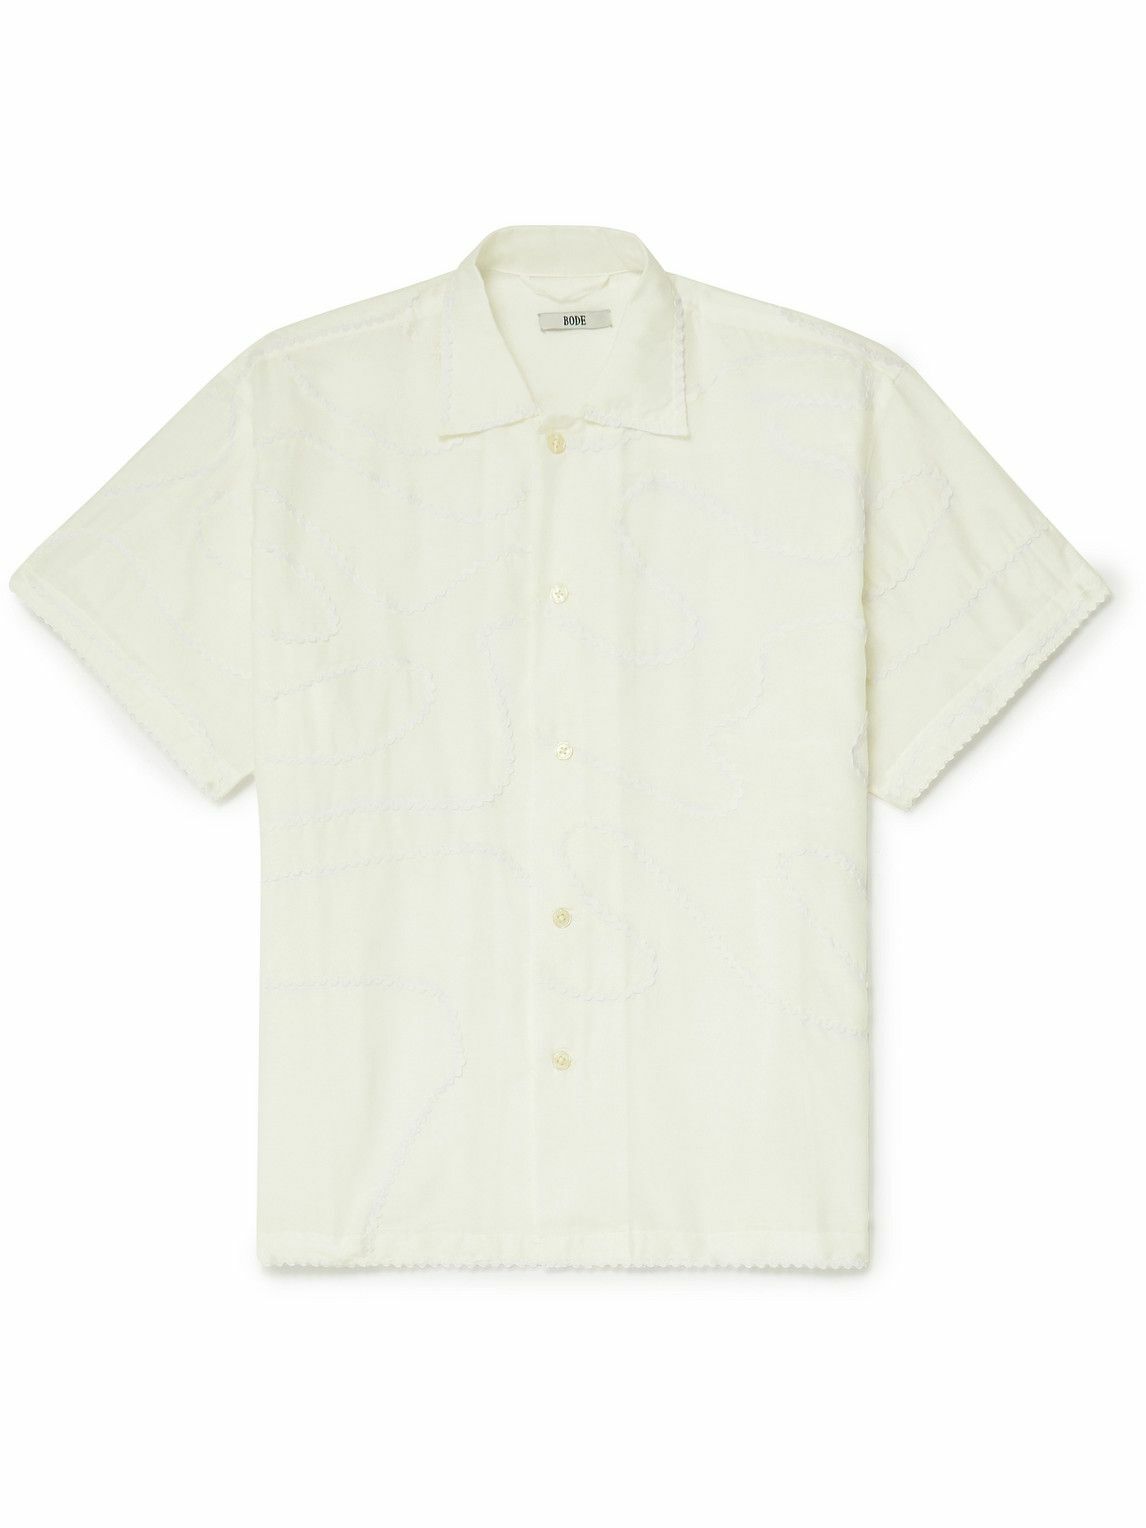 BODE - Ric Rac-Trimmed Cotton and Silk-Blend Shirt - White Bode